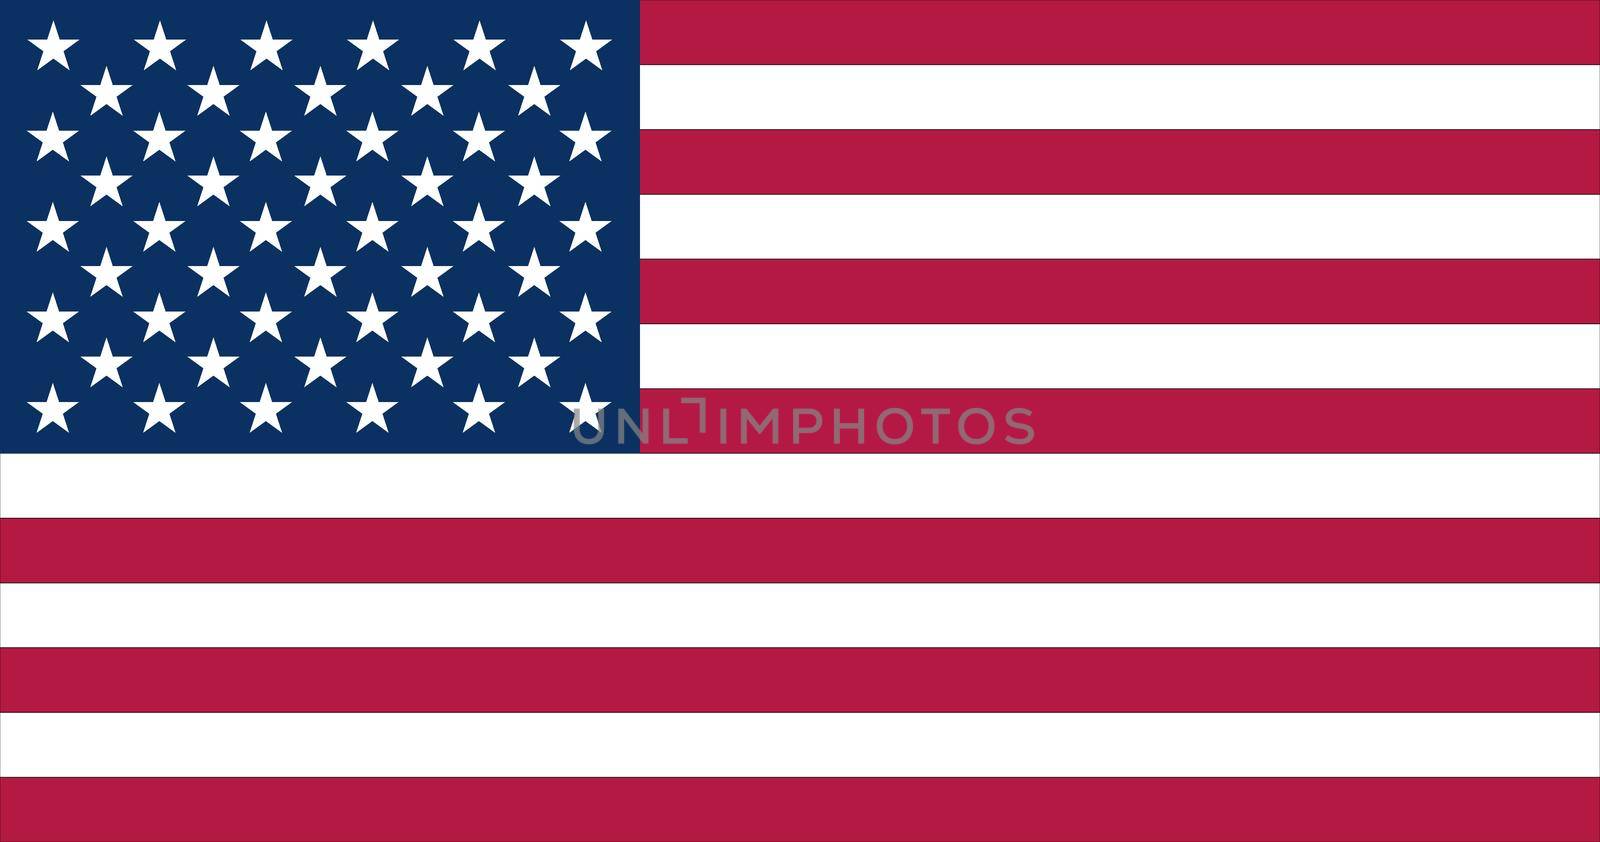 American flag vector illustration. National flag of the United States of America. The Stars and Stripes. The Star-Spangled Banner. USA flag emblem. 4th of July background. National symbol and ensign.